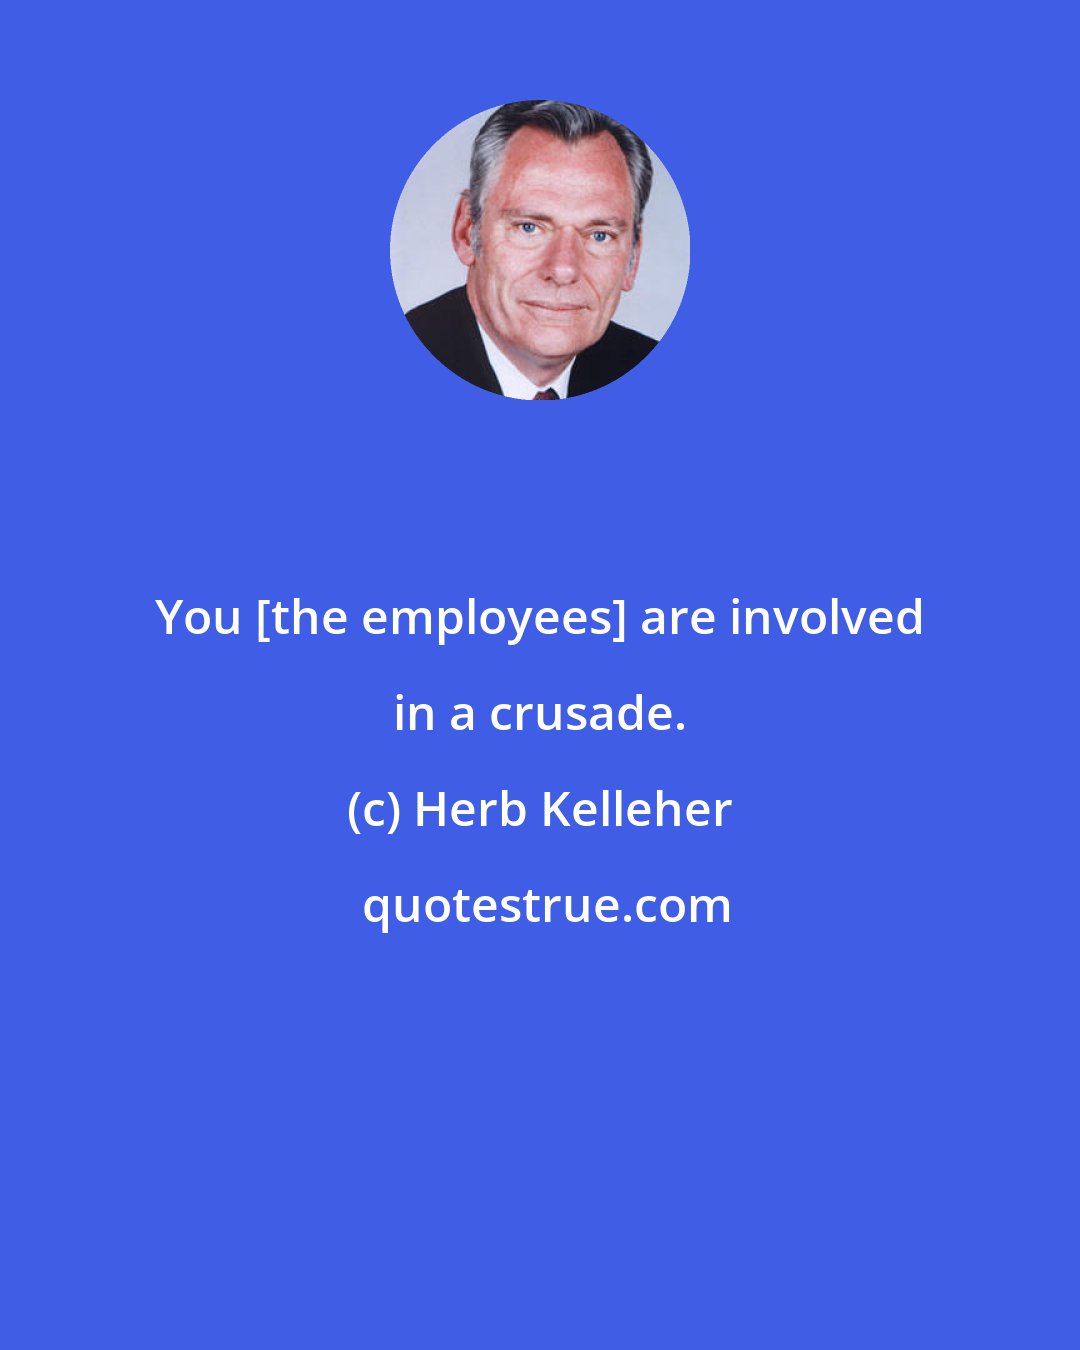 Herb Kelleher: You [the employees] are involved in a crusade.